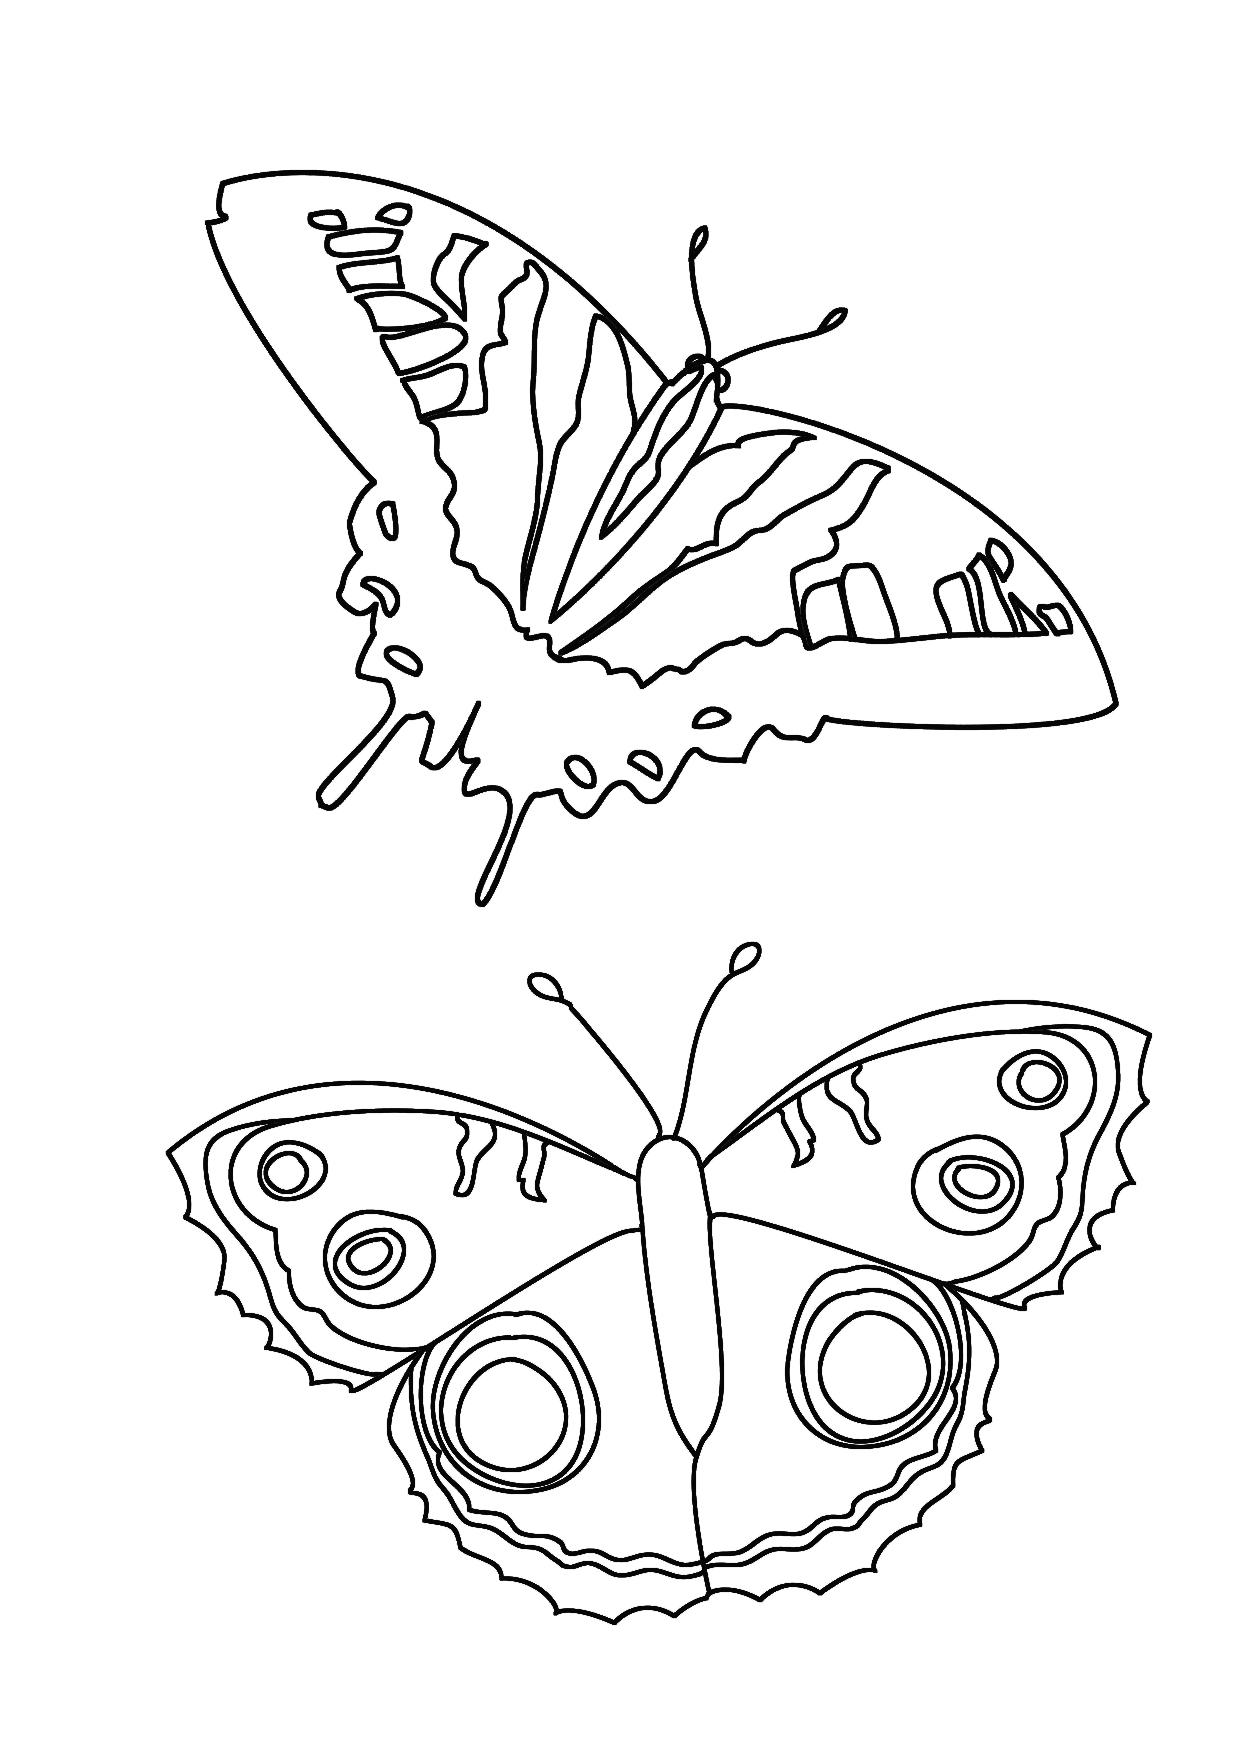 coloring page with butterflies